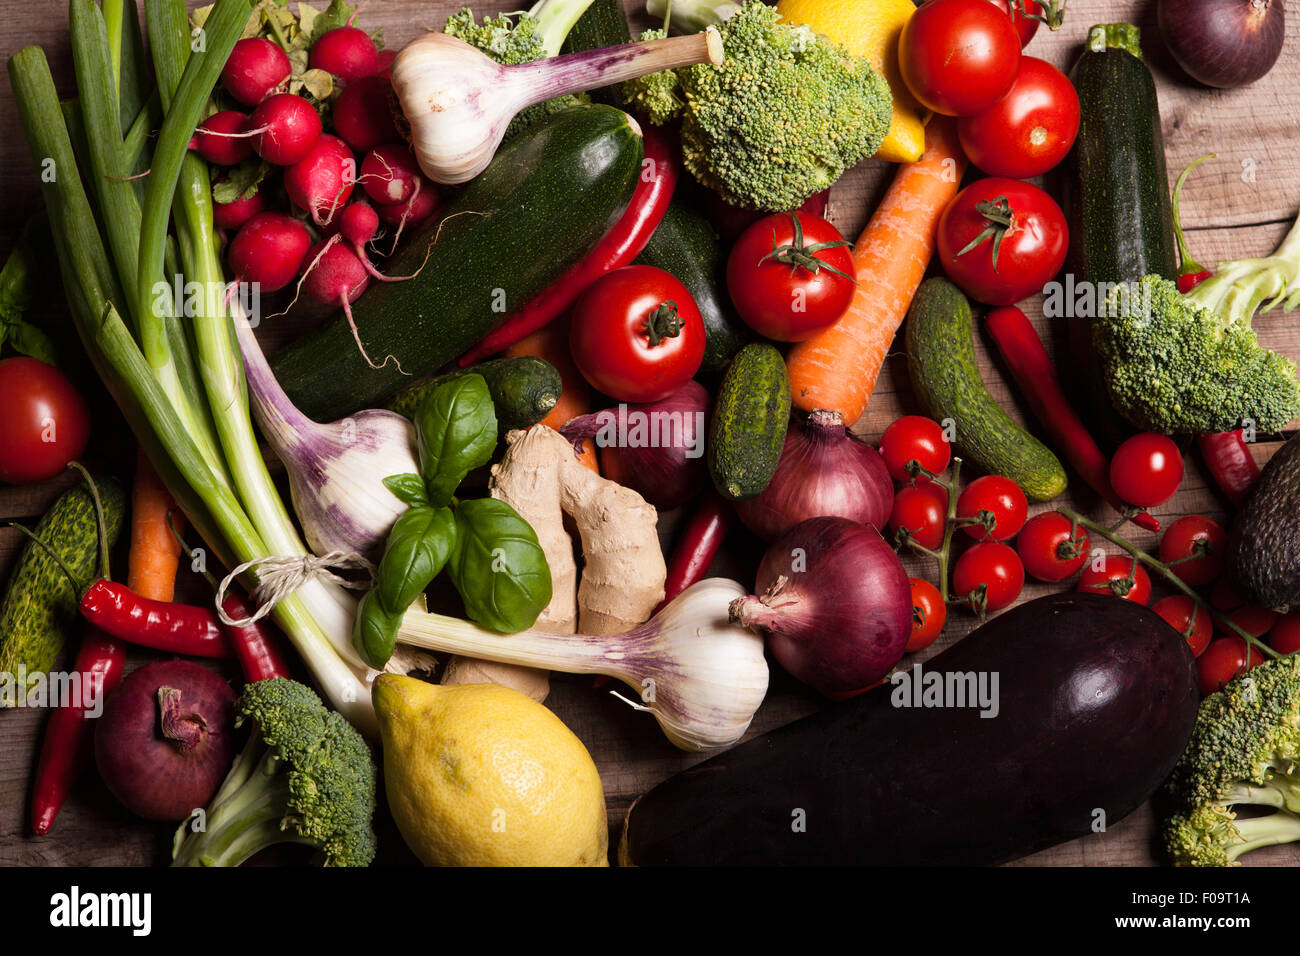 assorted Vegetables on wooden table Stock Photo